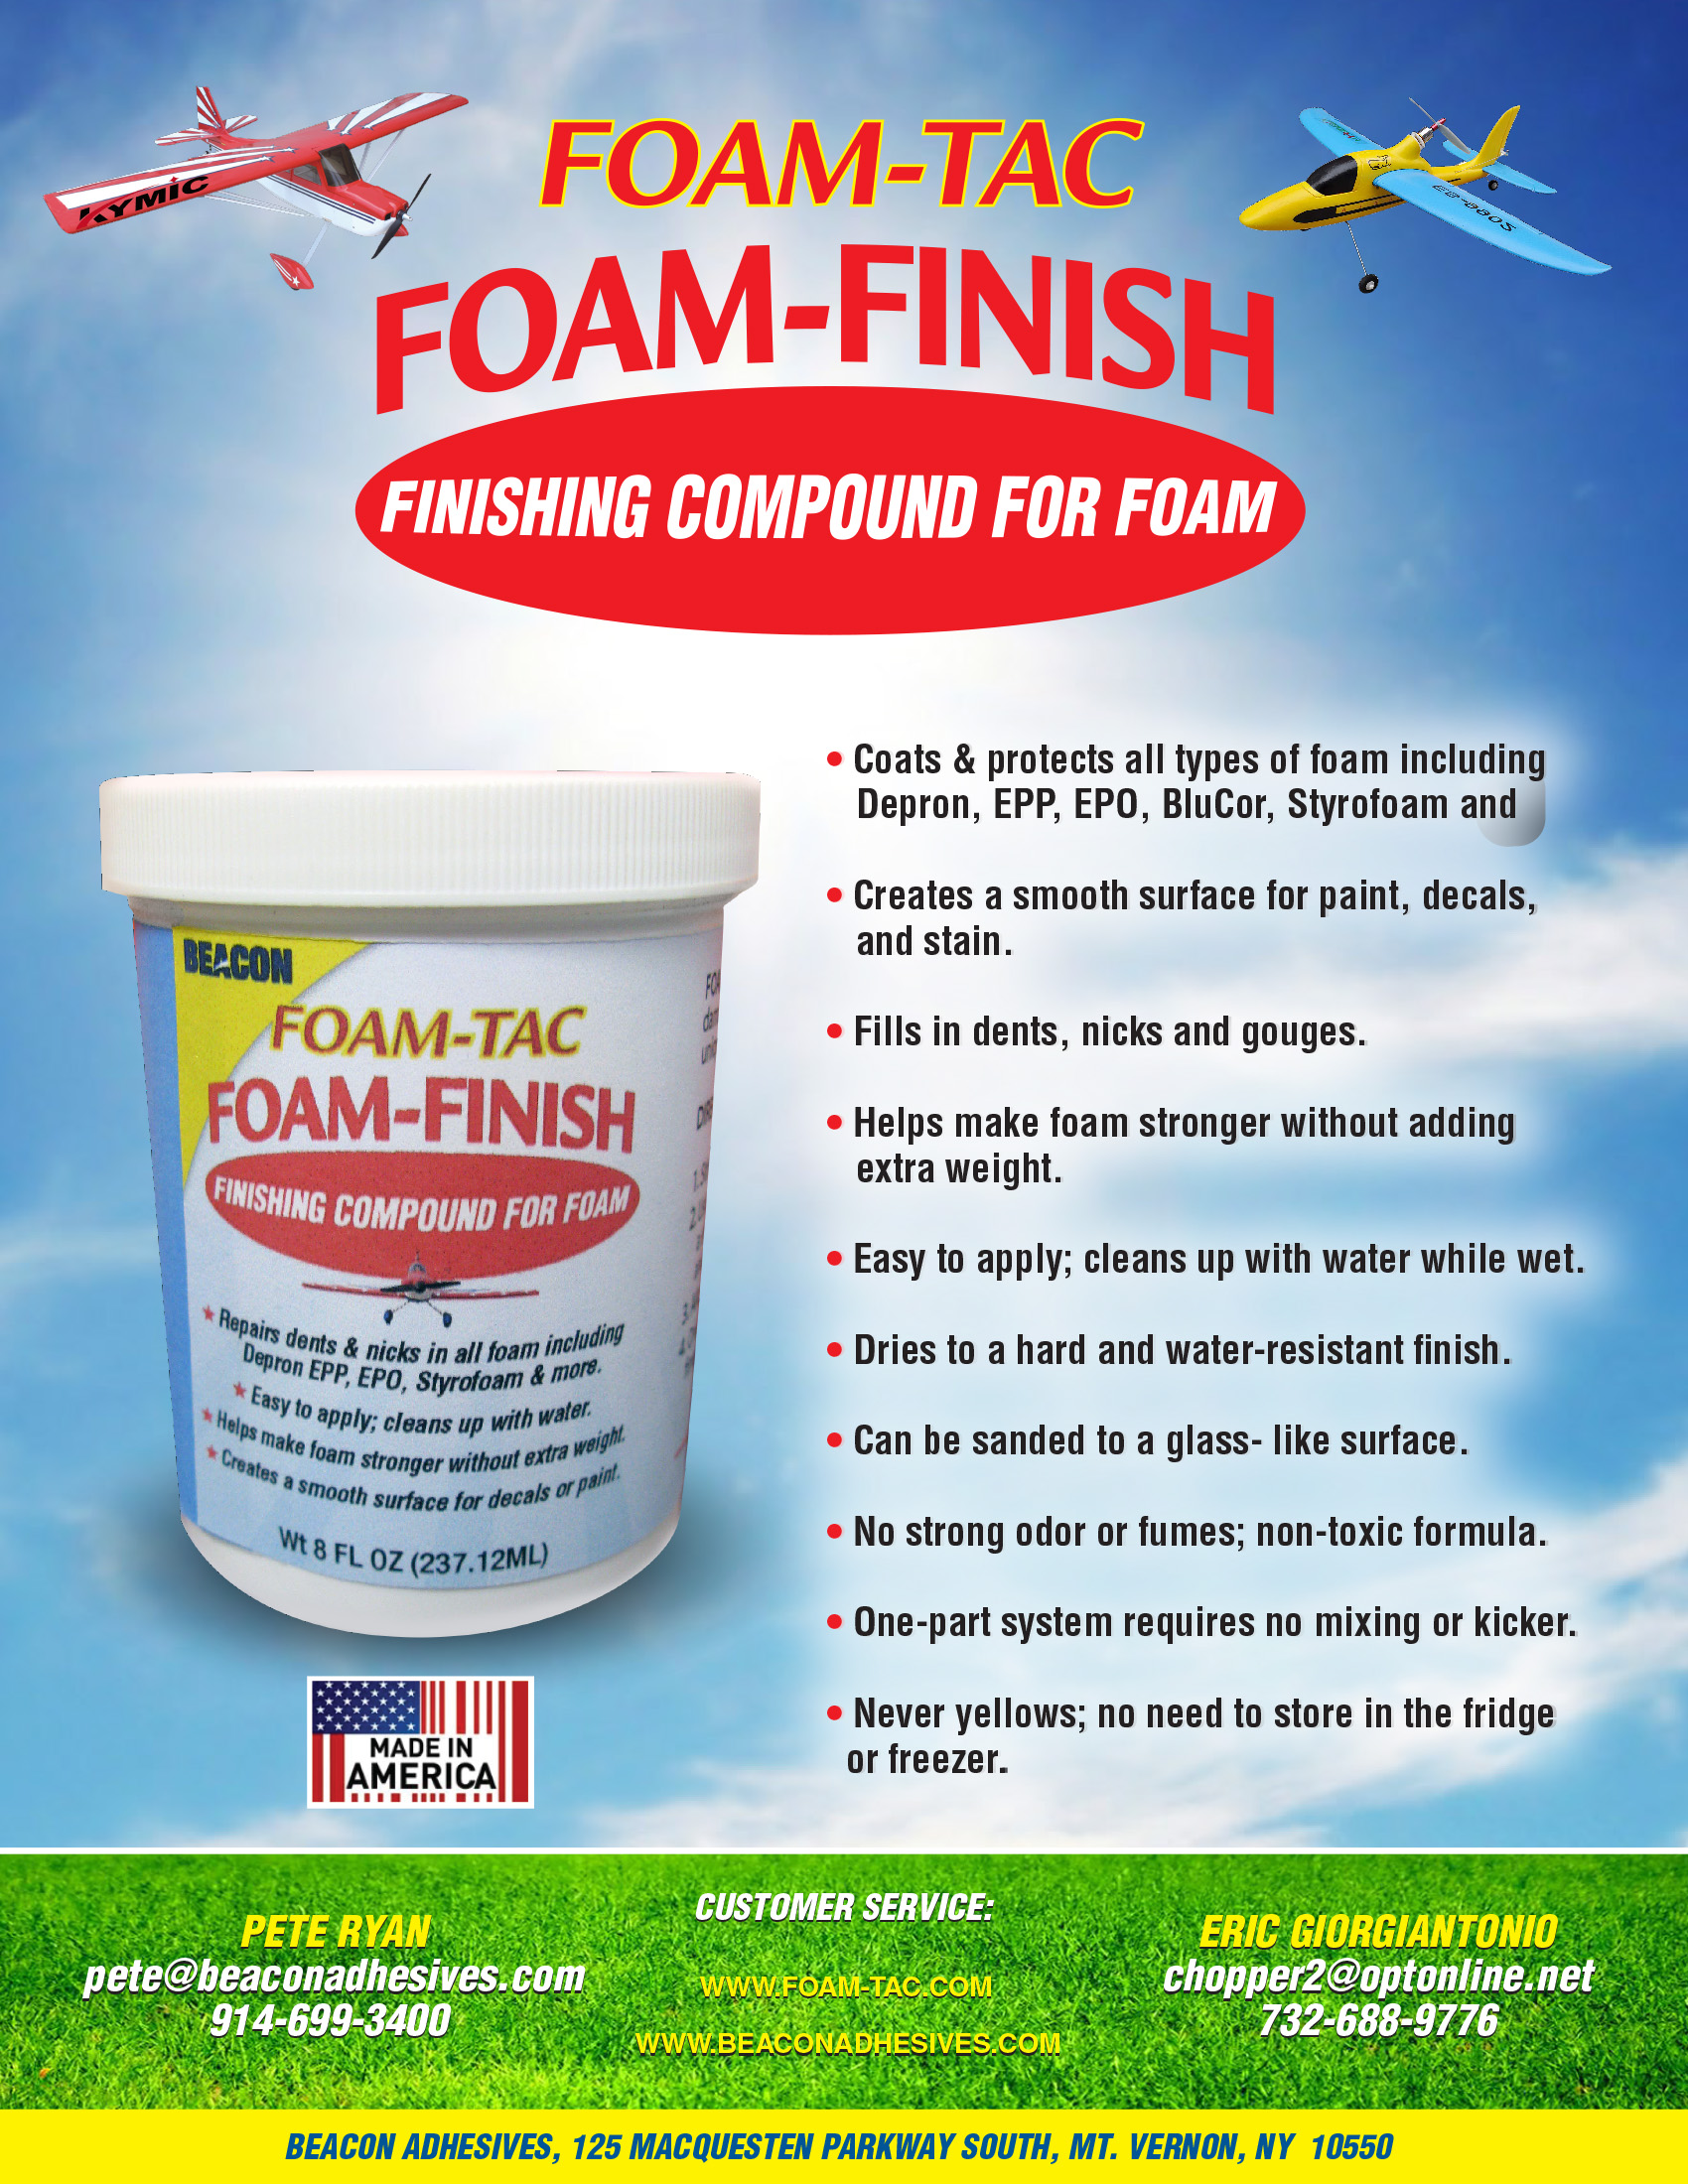 Proudly Made in America Since 1926 - The Offical Site of Foam-Tac